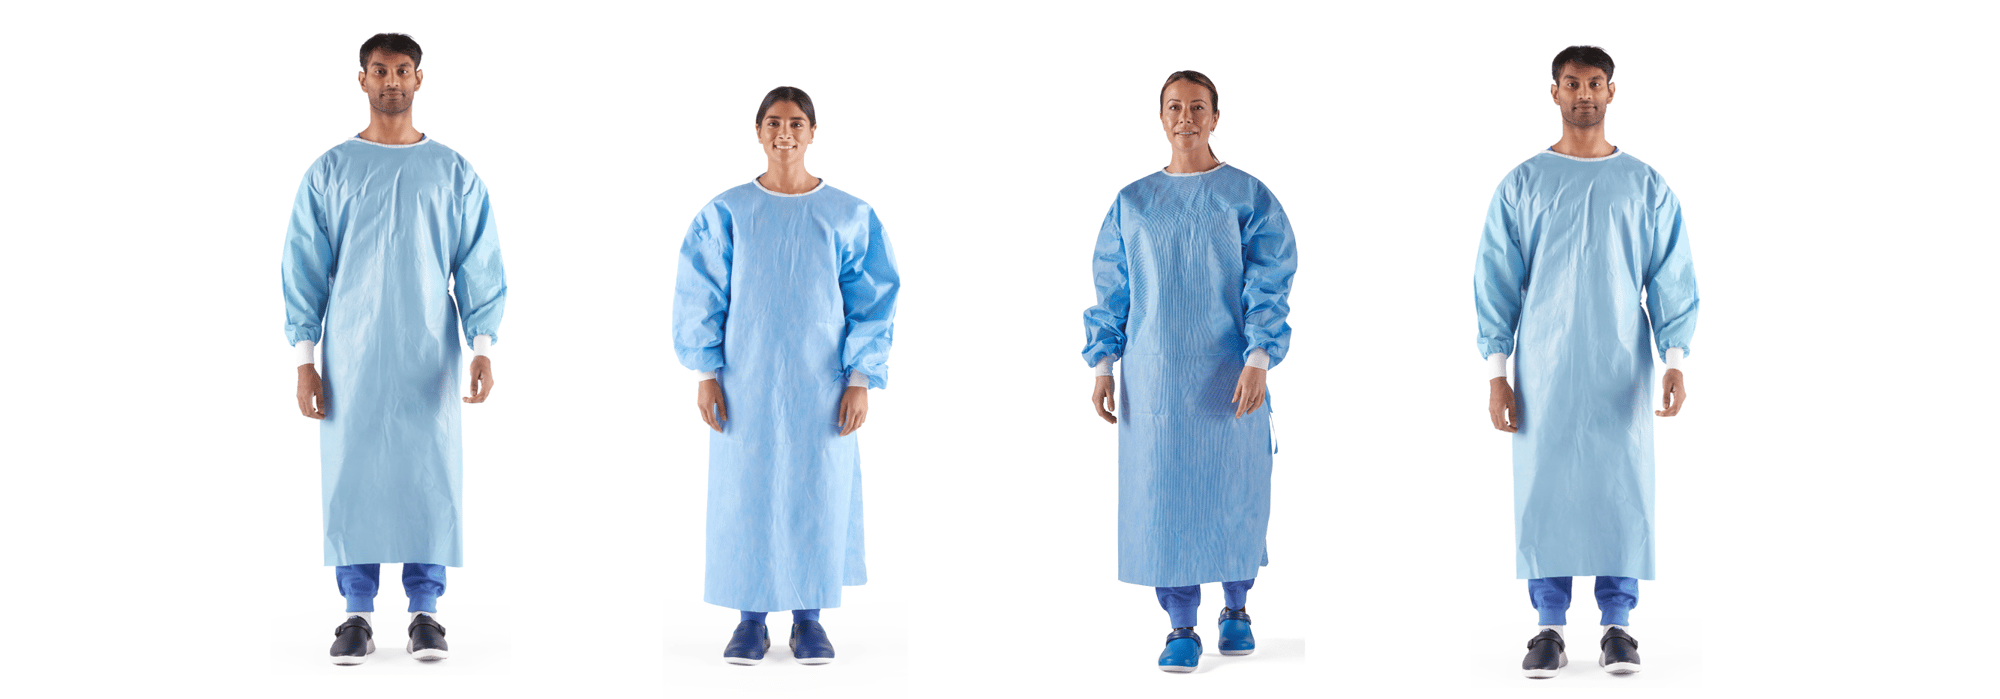 Sterile Gowns Group